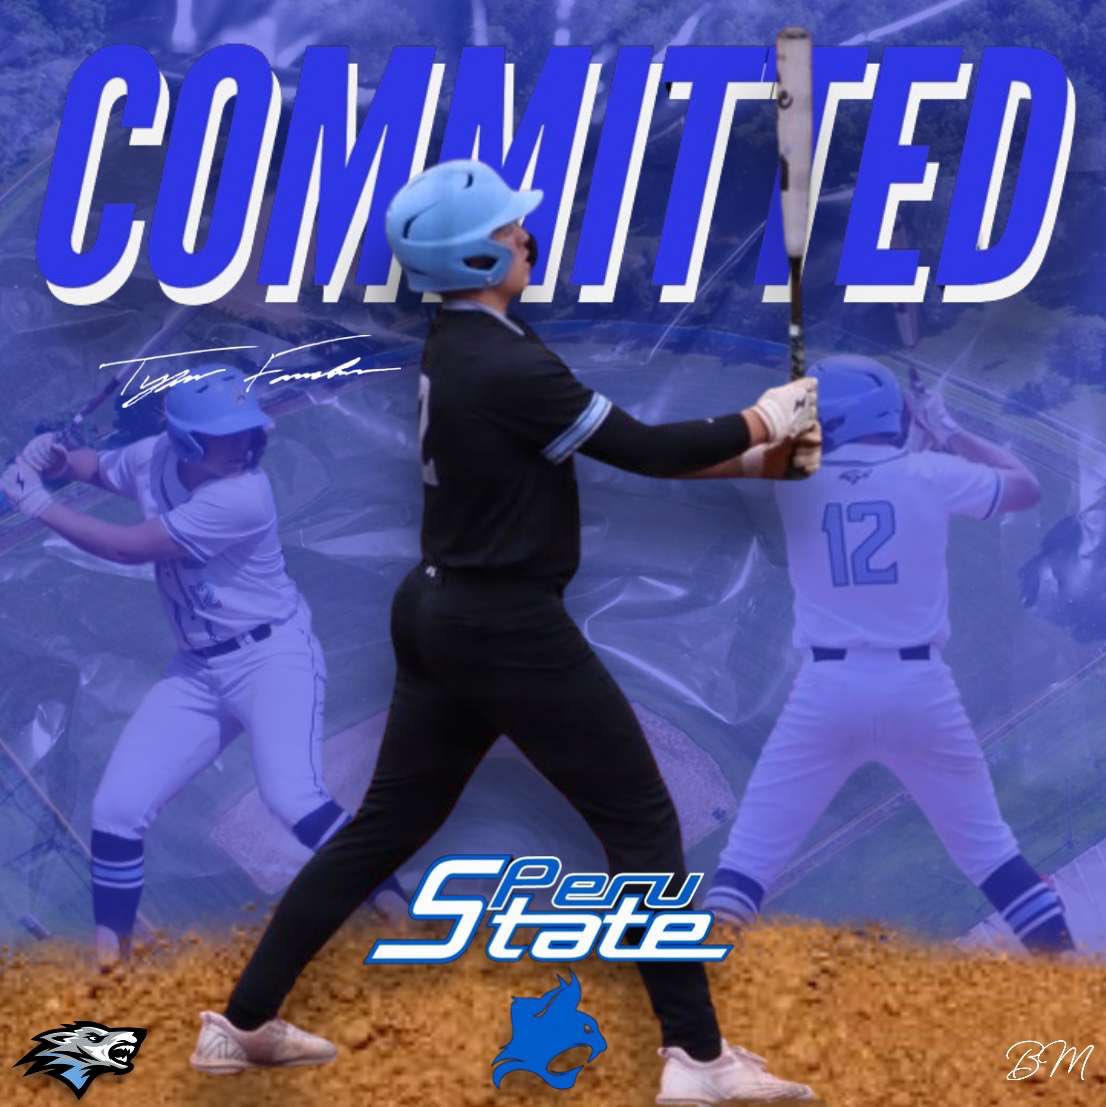 Excited and blessed to announce my commitment to Peru State College to continue my baseball and academic career. Want to thank my coaches, family and friends who have helped me on my journey. @PeruStBaseball